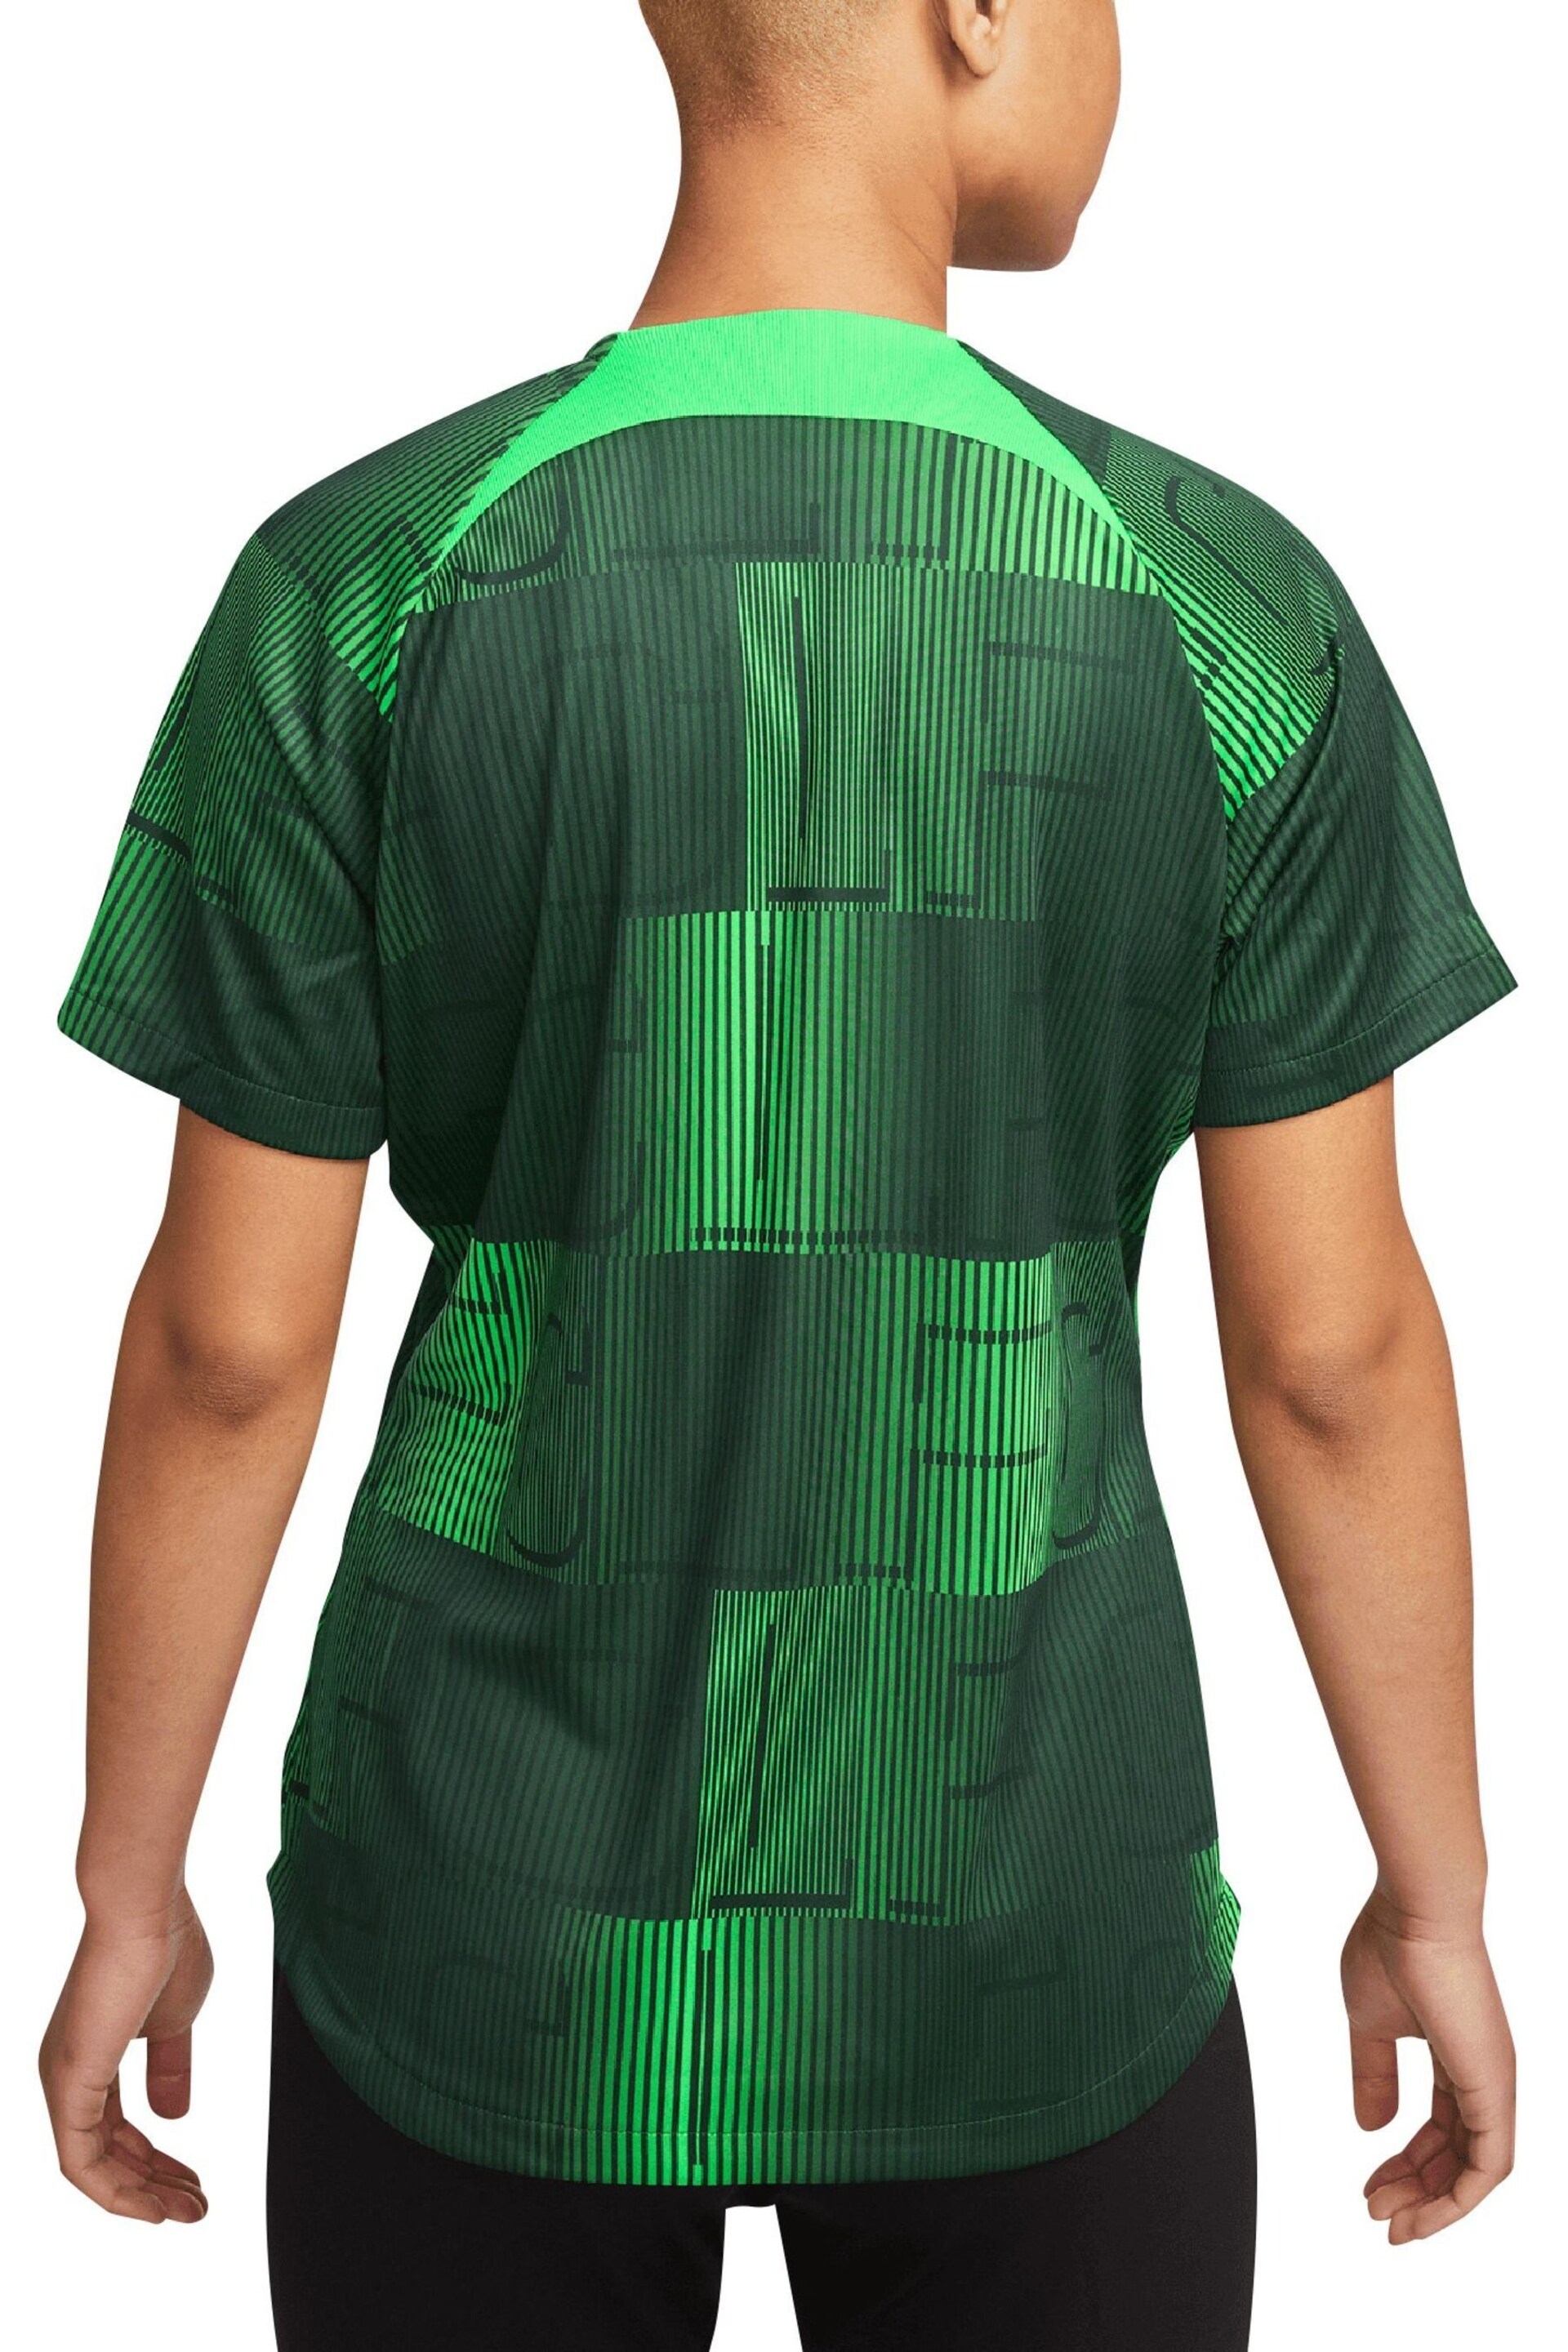 Nike Green Liverpool Academy Pro Pre Match Top Womens - Image 2 of 3